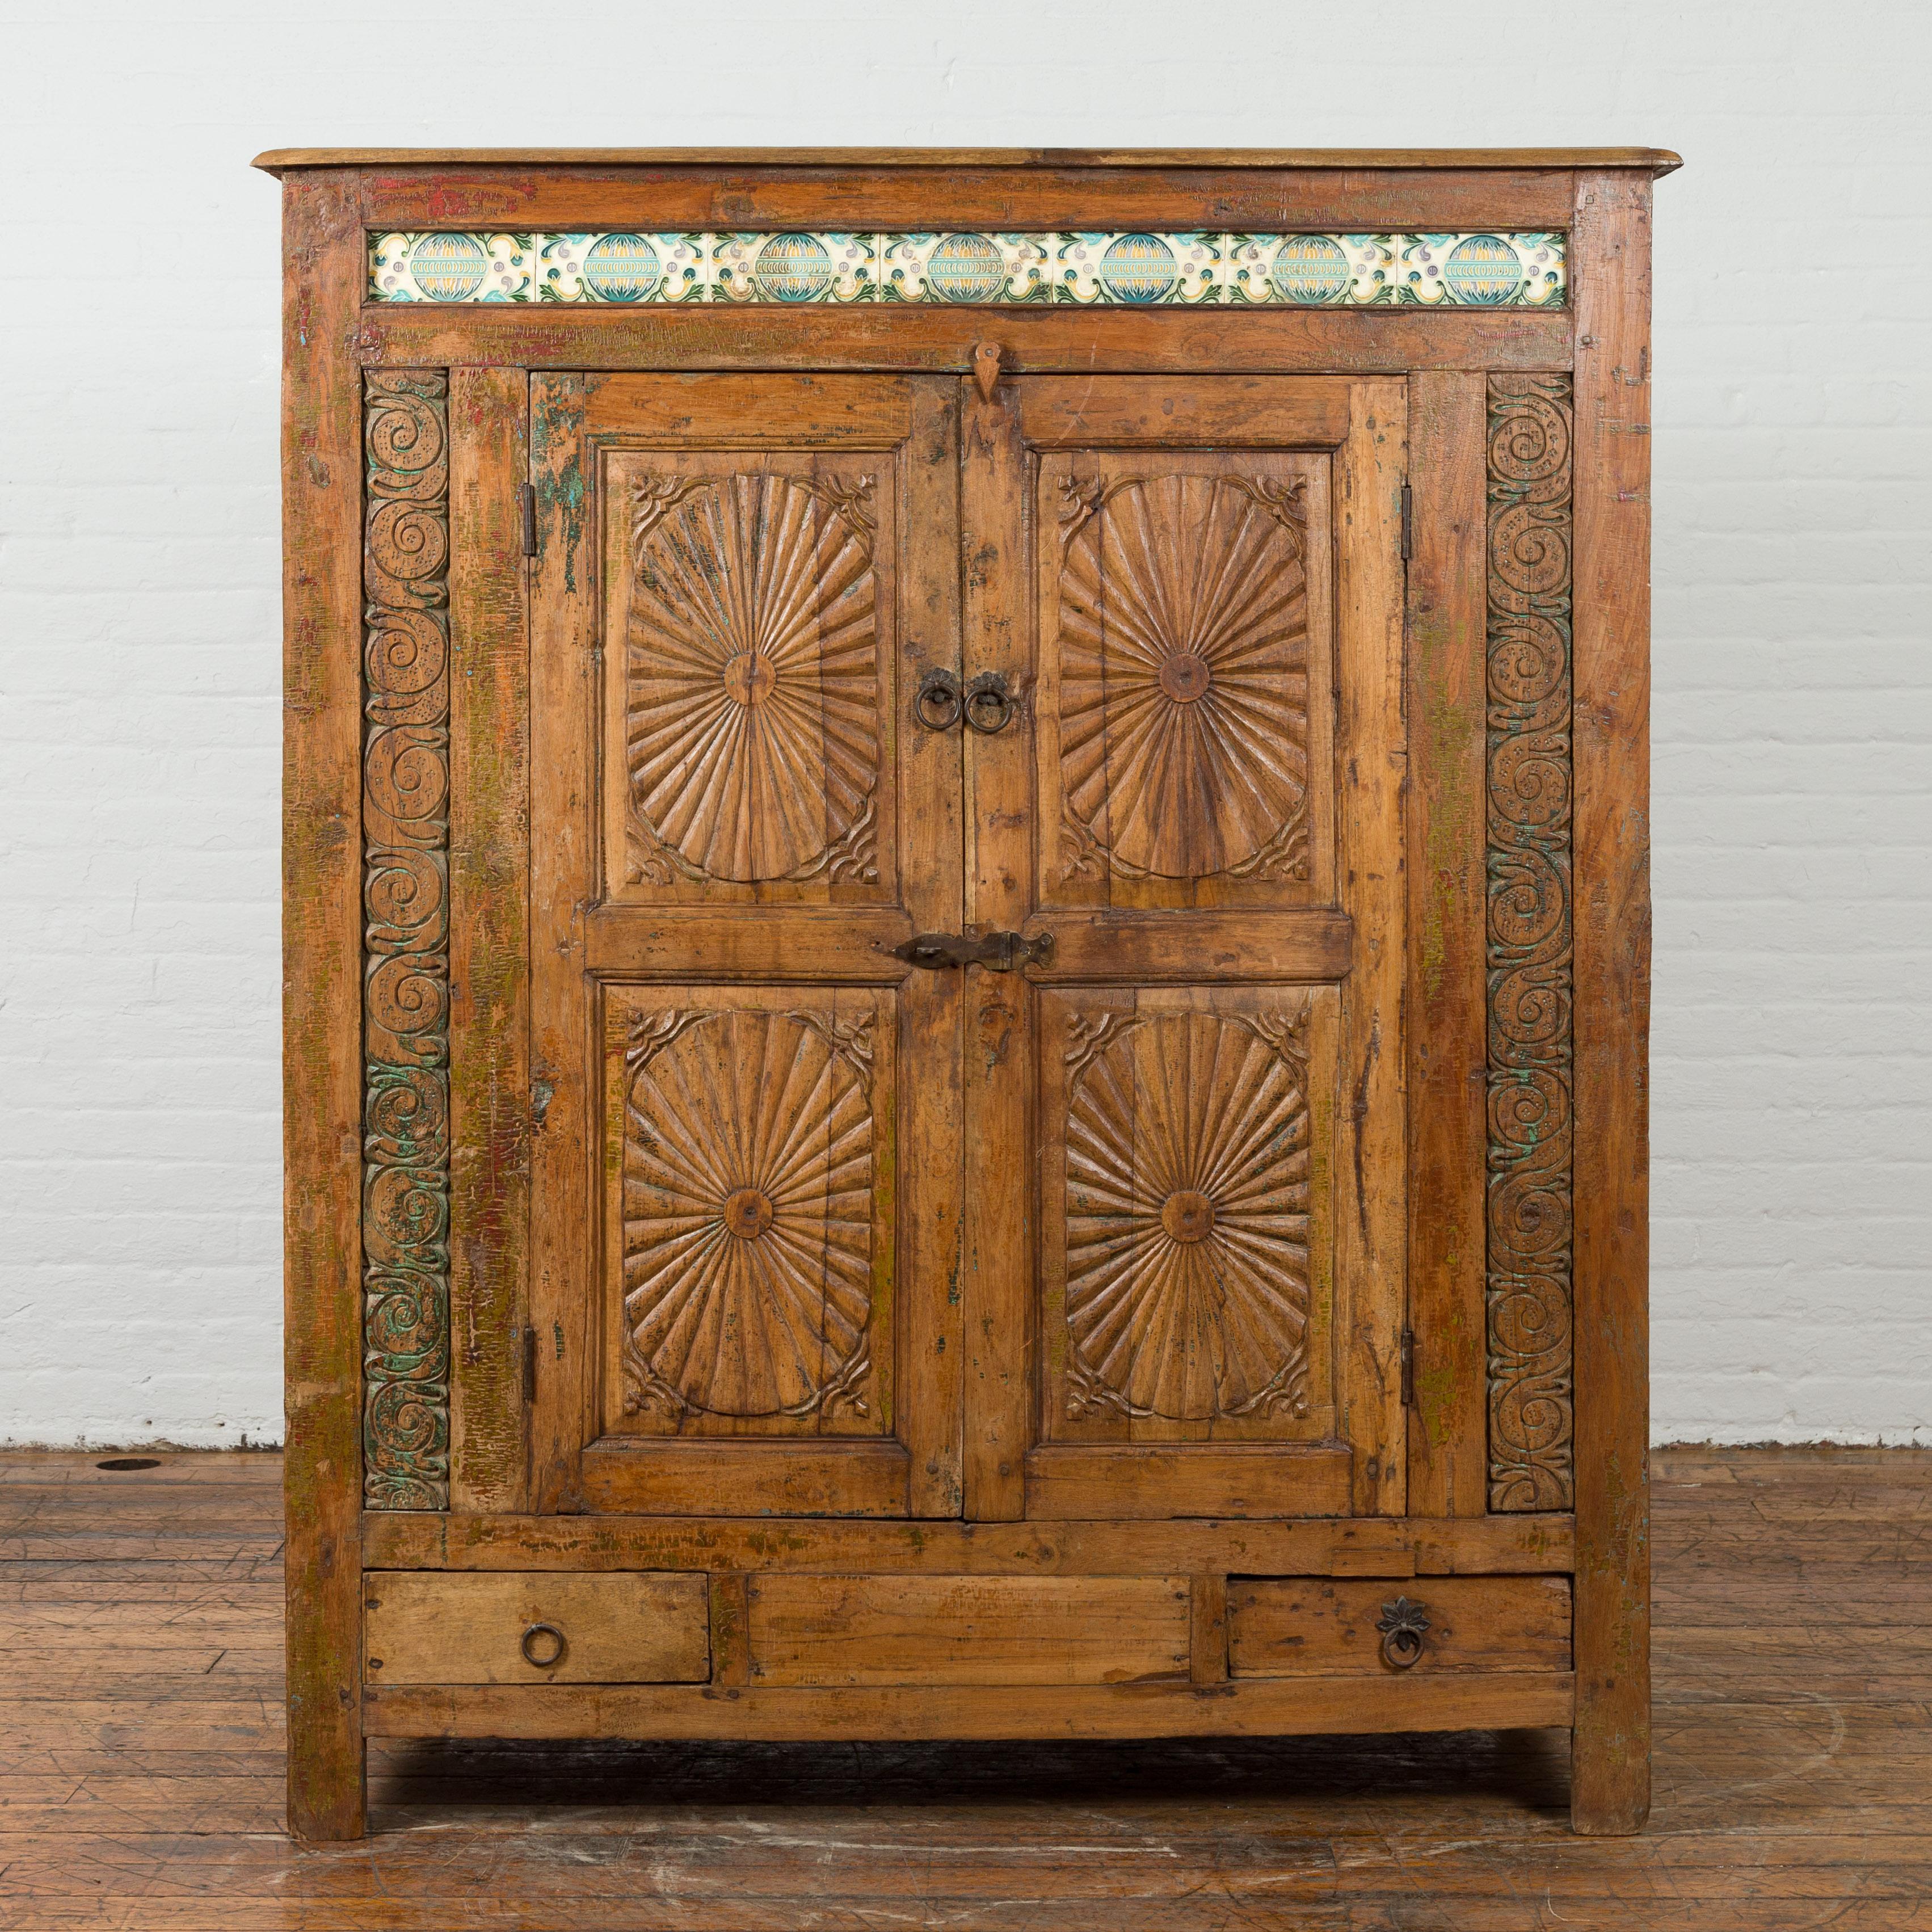 Our beautiful Indonesian large antique cabinet from the 19th century is a stunning addition to our extensive vintage and antique cabinets collection. This tall wooden antique cabinet features eye-catching blue and yellow enameled tiles at the top